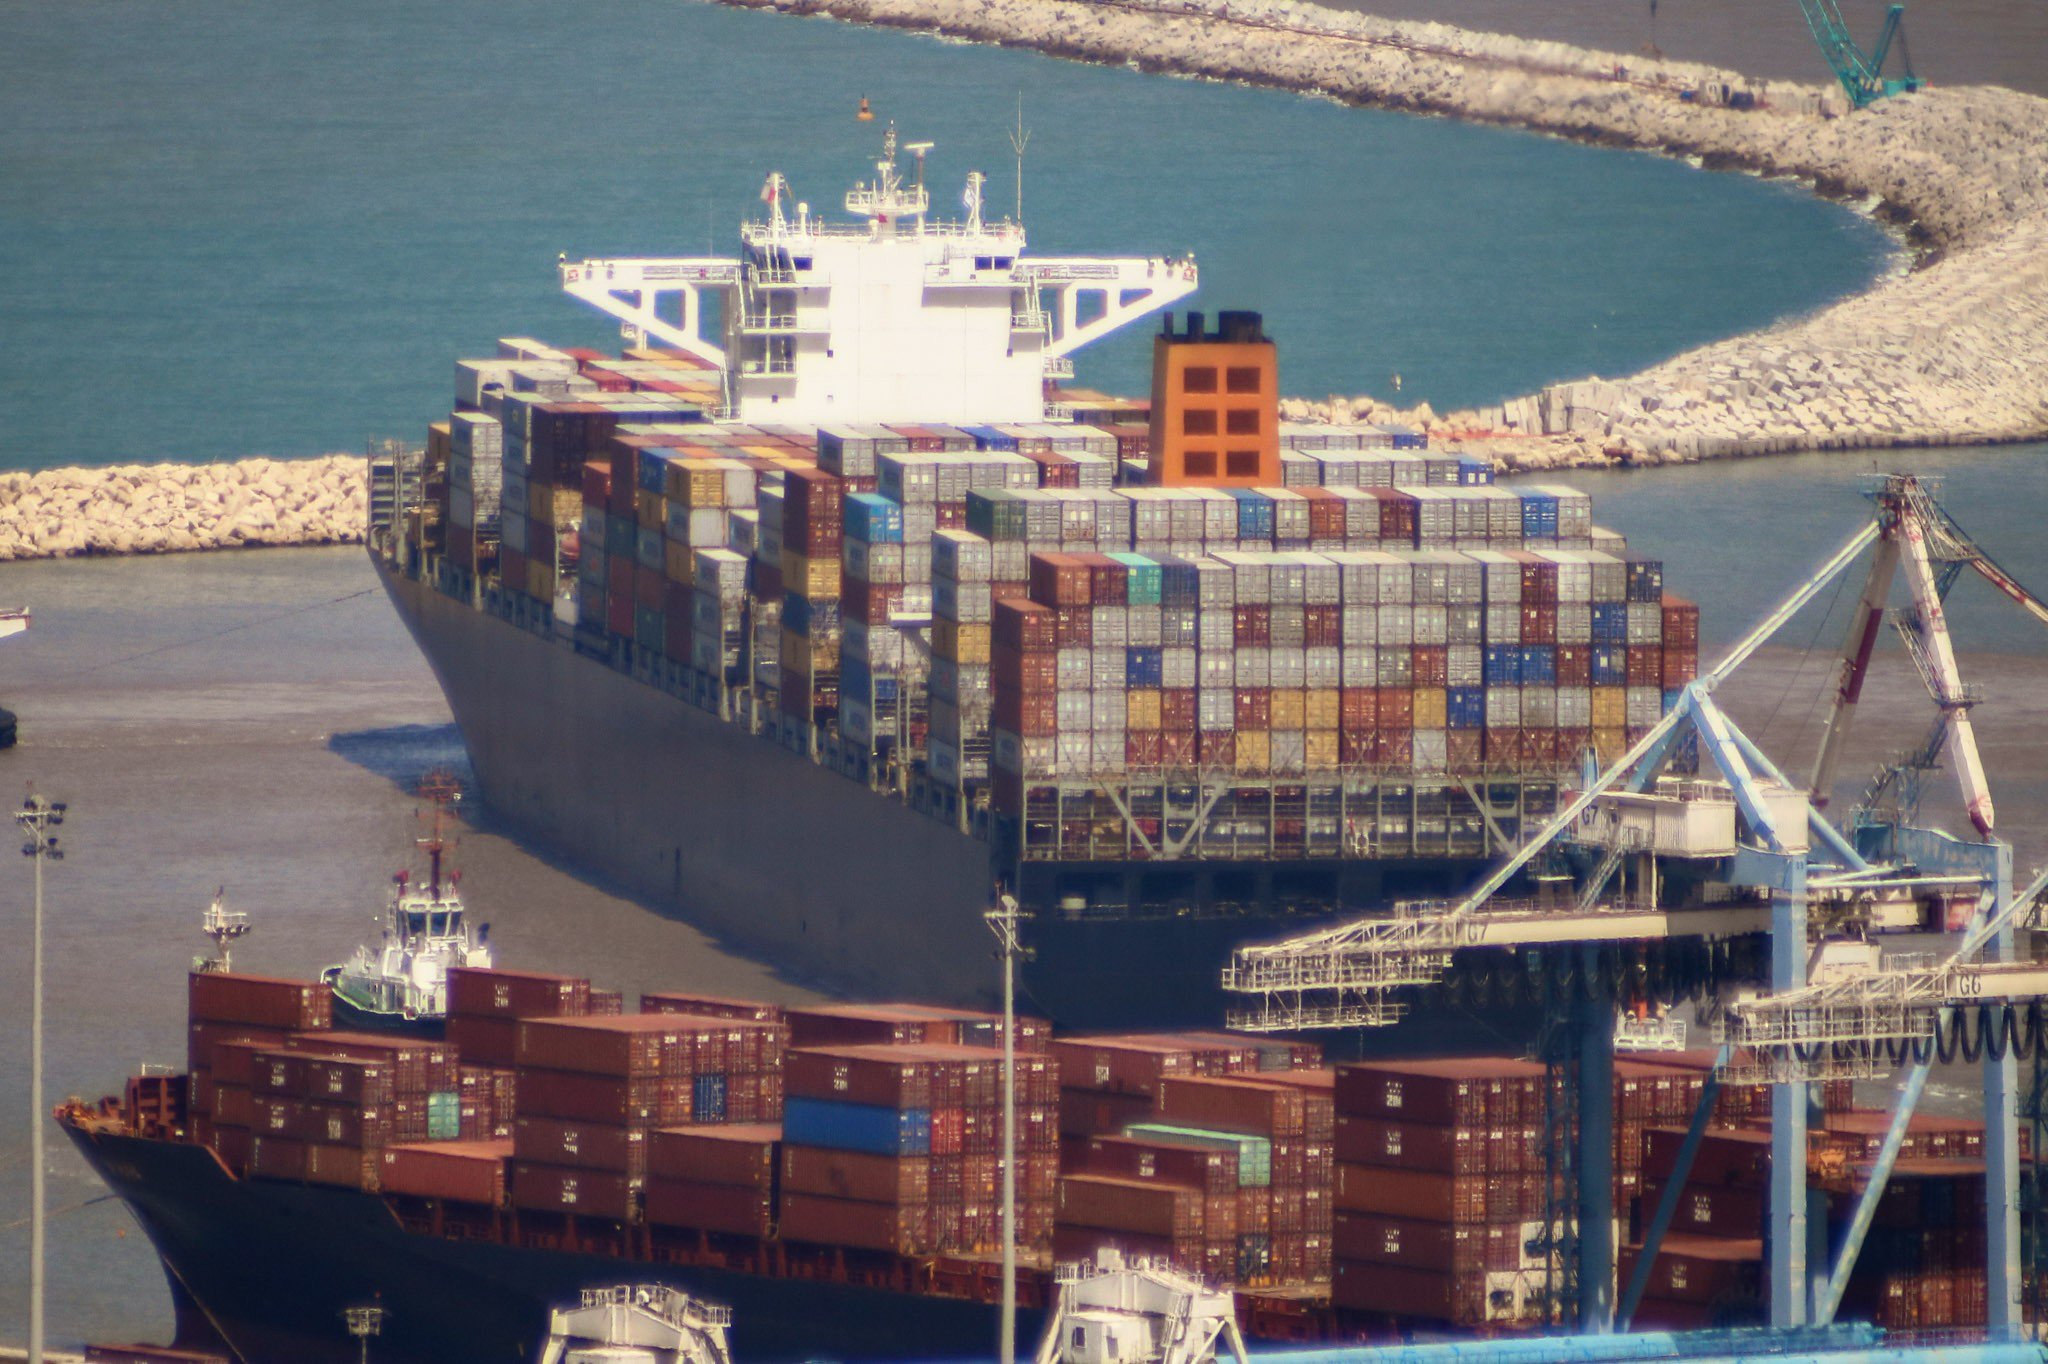 The report assesses the preparedness of the shipping industry to new emissions standards as low.